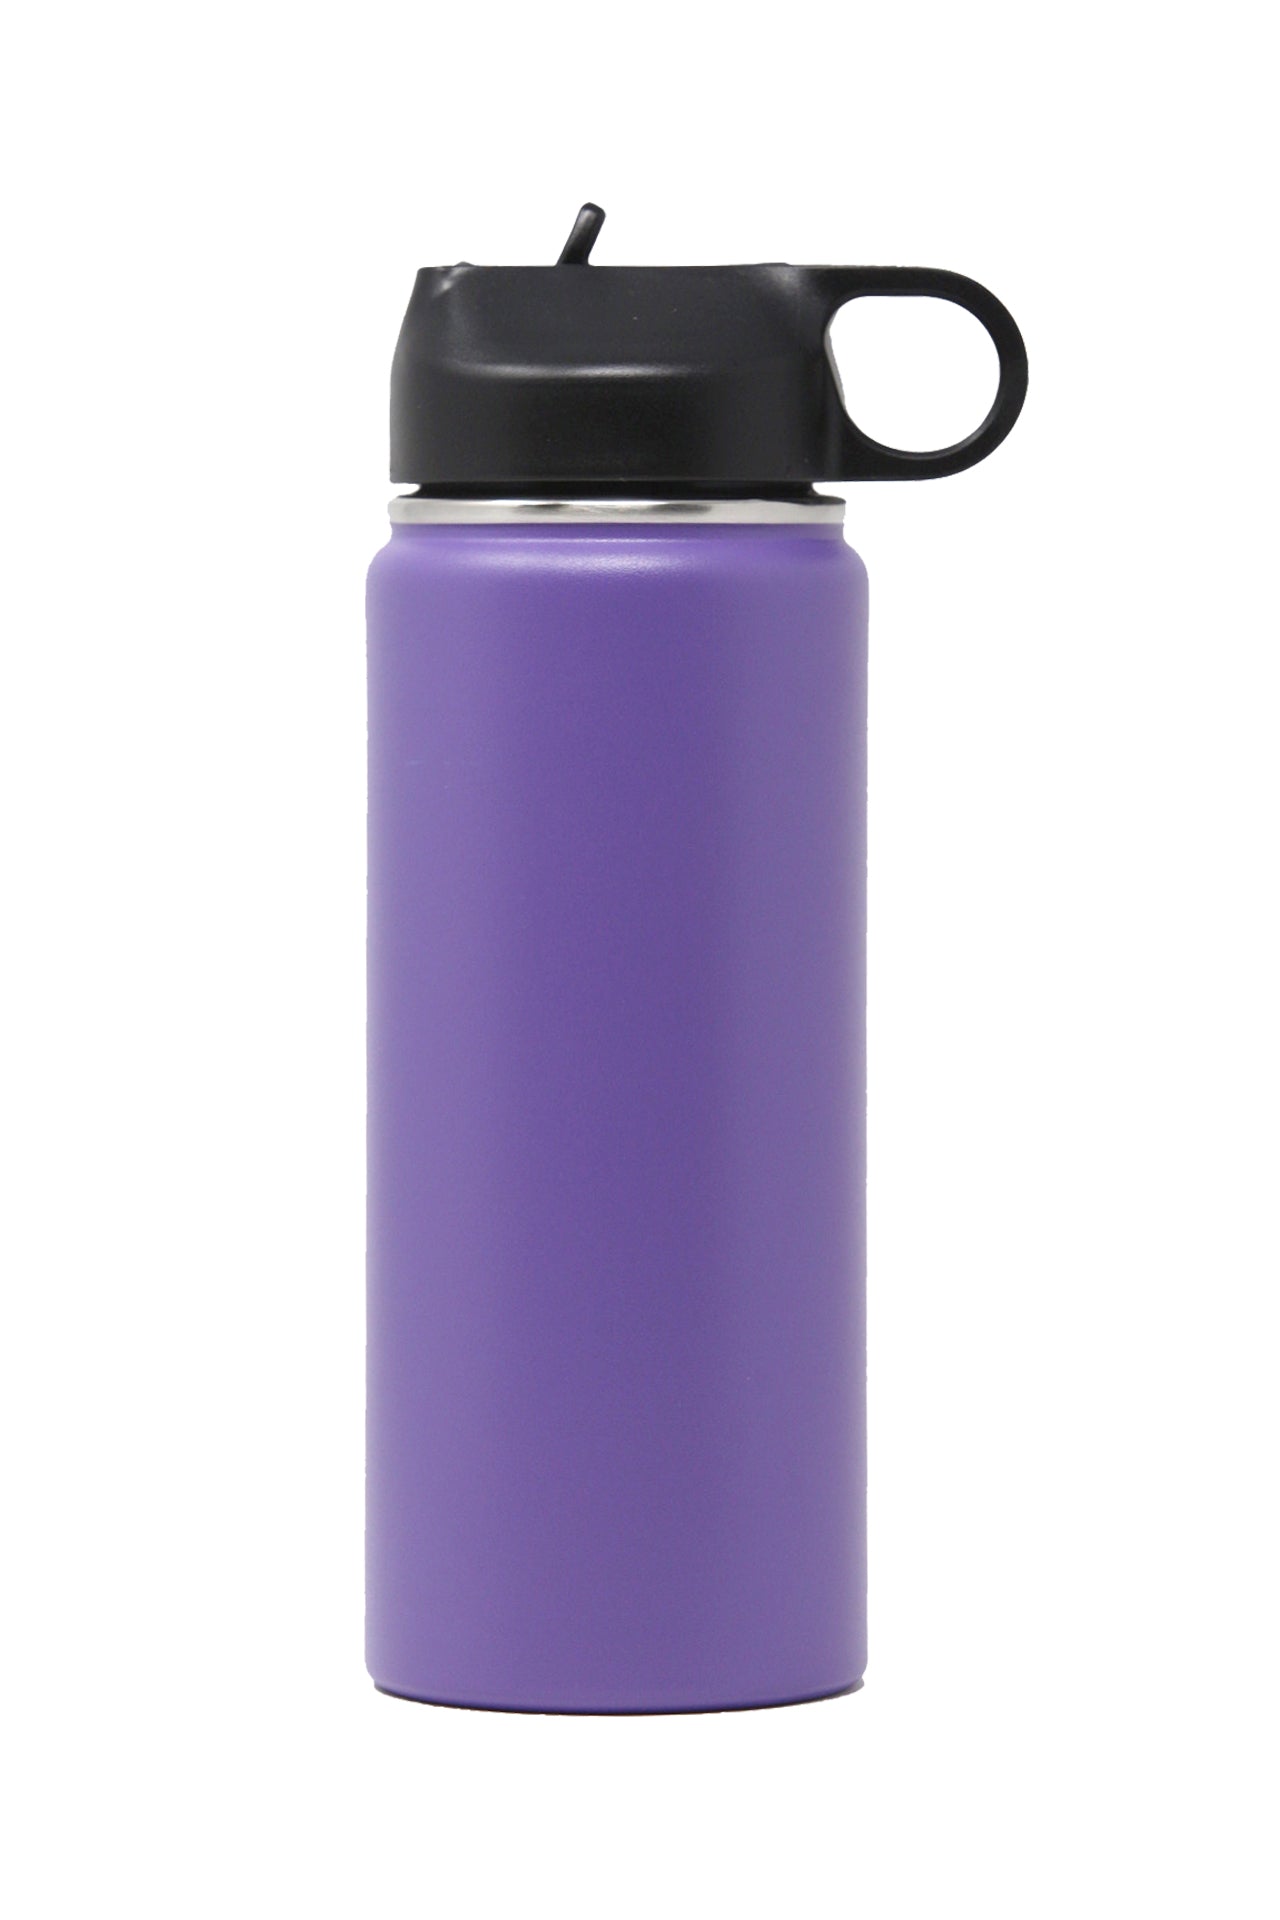 18 oz. Insulated Stainless Steel Water Bottle with Flip Top Lid & Straw